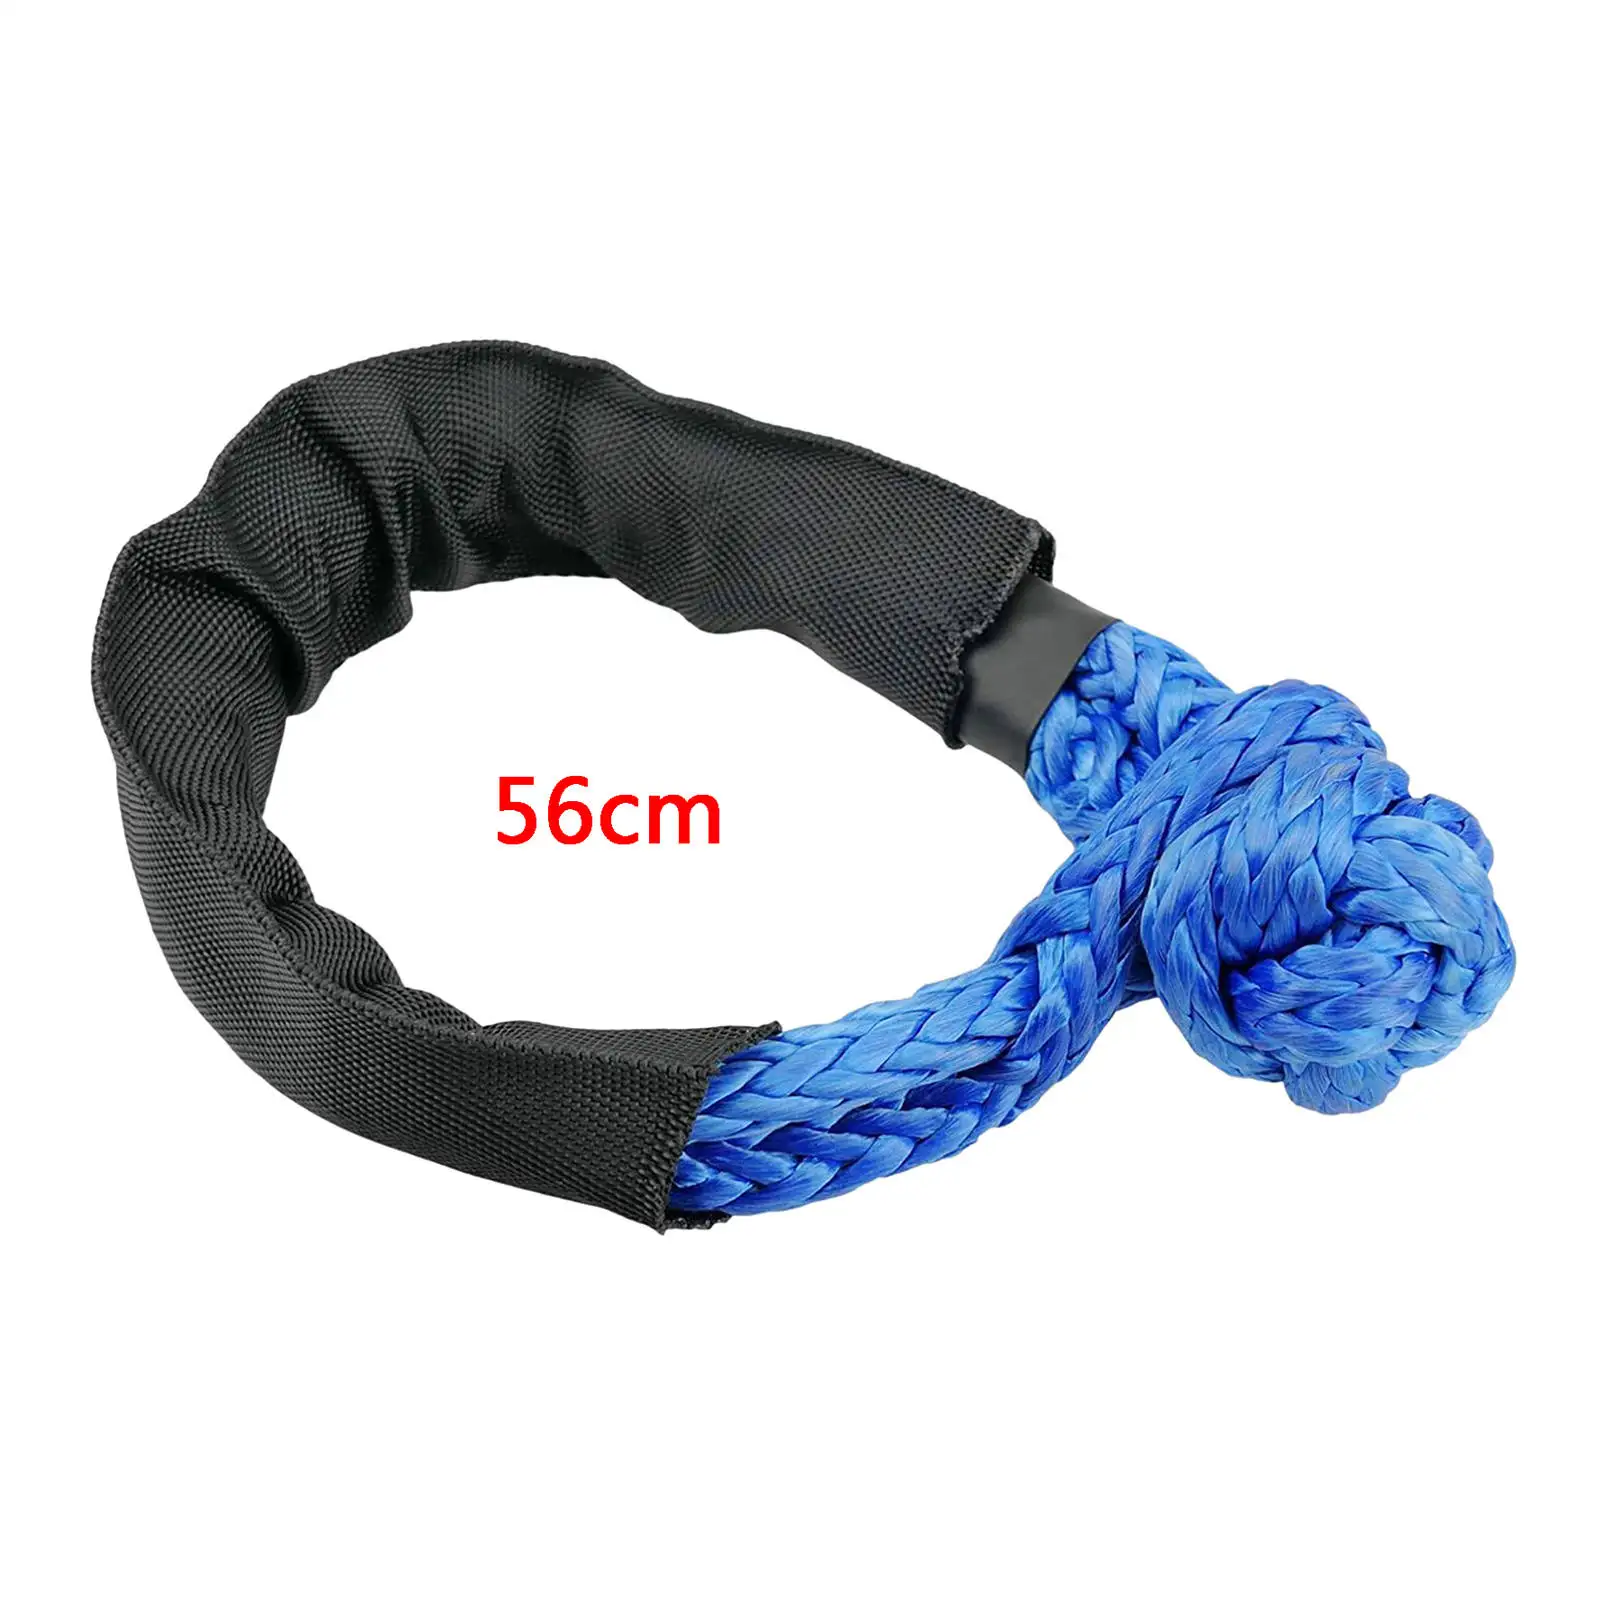 Soft Shackle Rope with Protective Sleeve for Vehicle Recovery